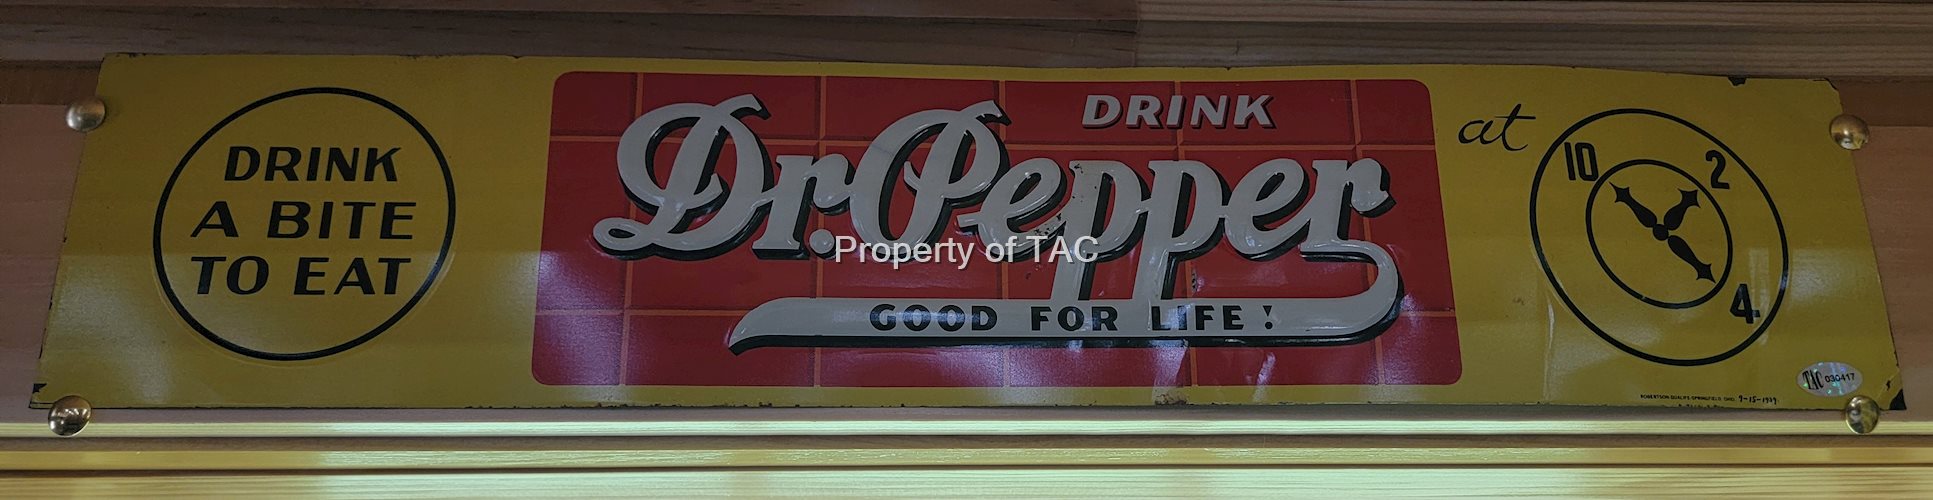 Dr. Pepper 10-2-4 Drink a Bite to Eat Metal Sign